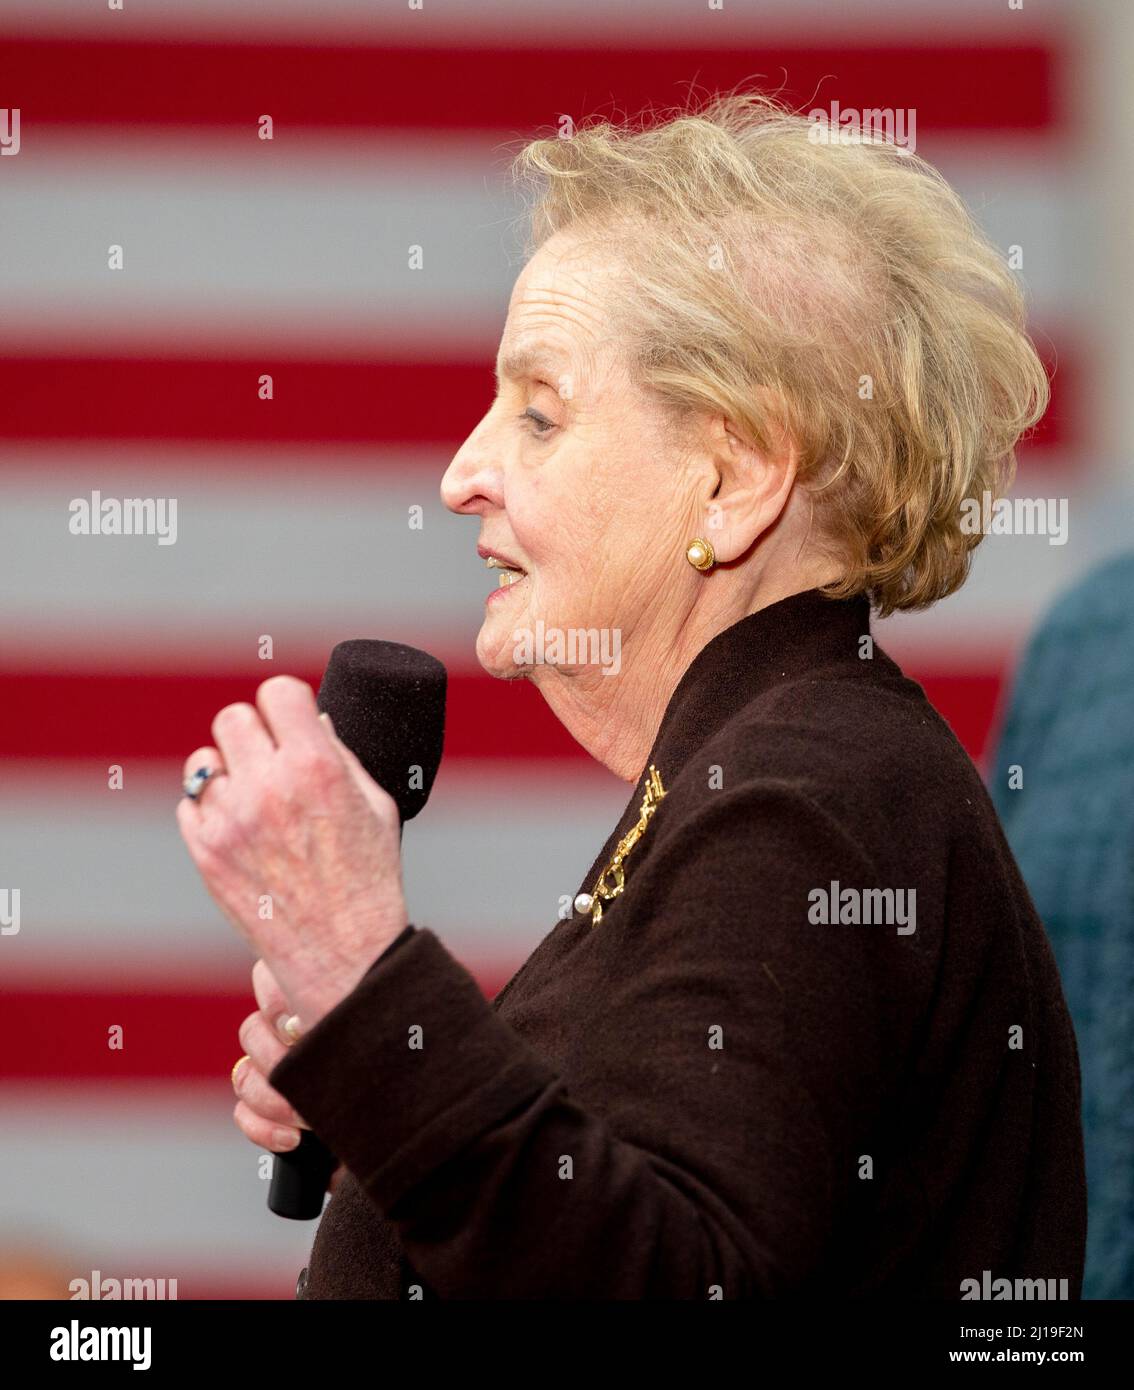 February 6, 2016, Concord, New Hampshire, USA: Former U.S. Secretary of State Madeline Albright campaigns for U.S. Democratic presidential candidate Hillary Clinton at a campaign rally in Concord, New Hampshire on February 6, 2016. Albright dies at age 84 on March 23, 2022. Credit: Keiko Hiromi/AFLO/Alamy Live News Stock Photo